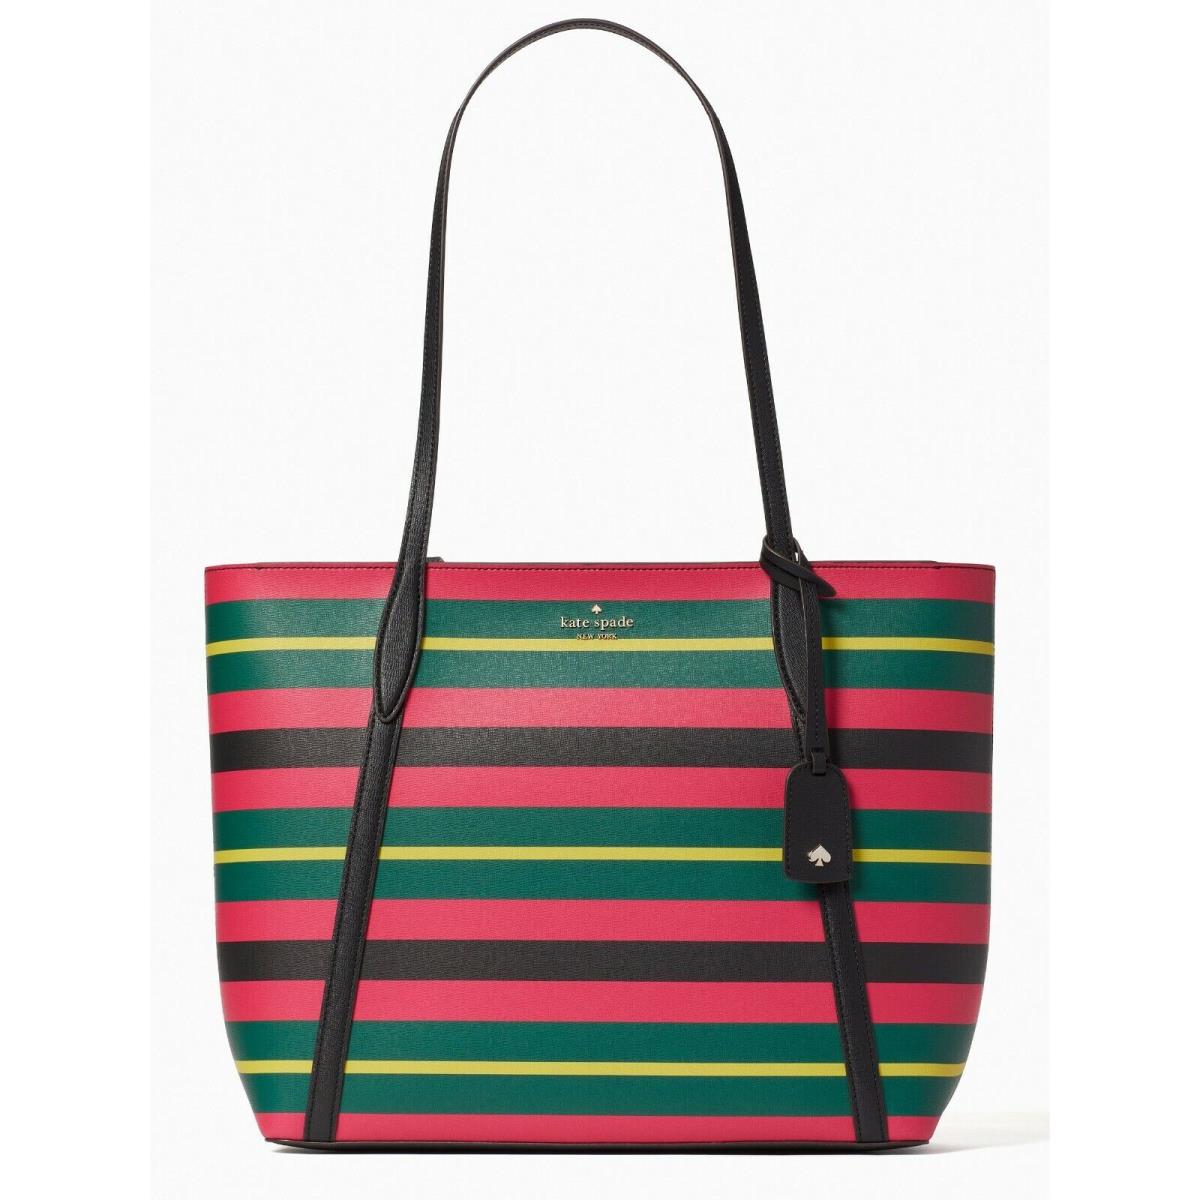 New Kate Spade Cara Wrapping Paper Print Large Tote Multicolor / Dust Bag